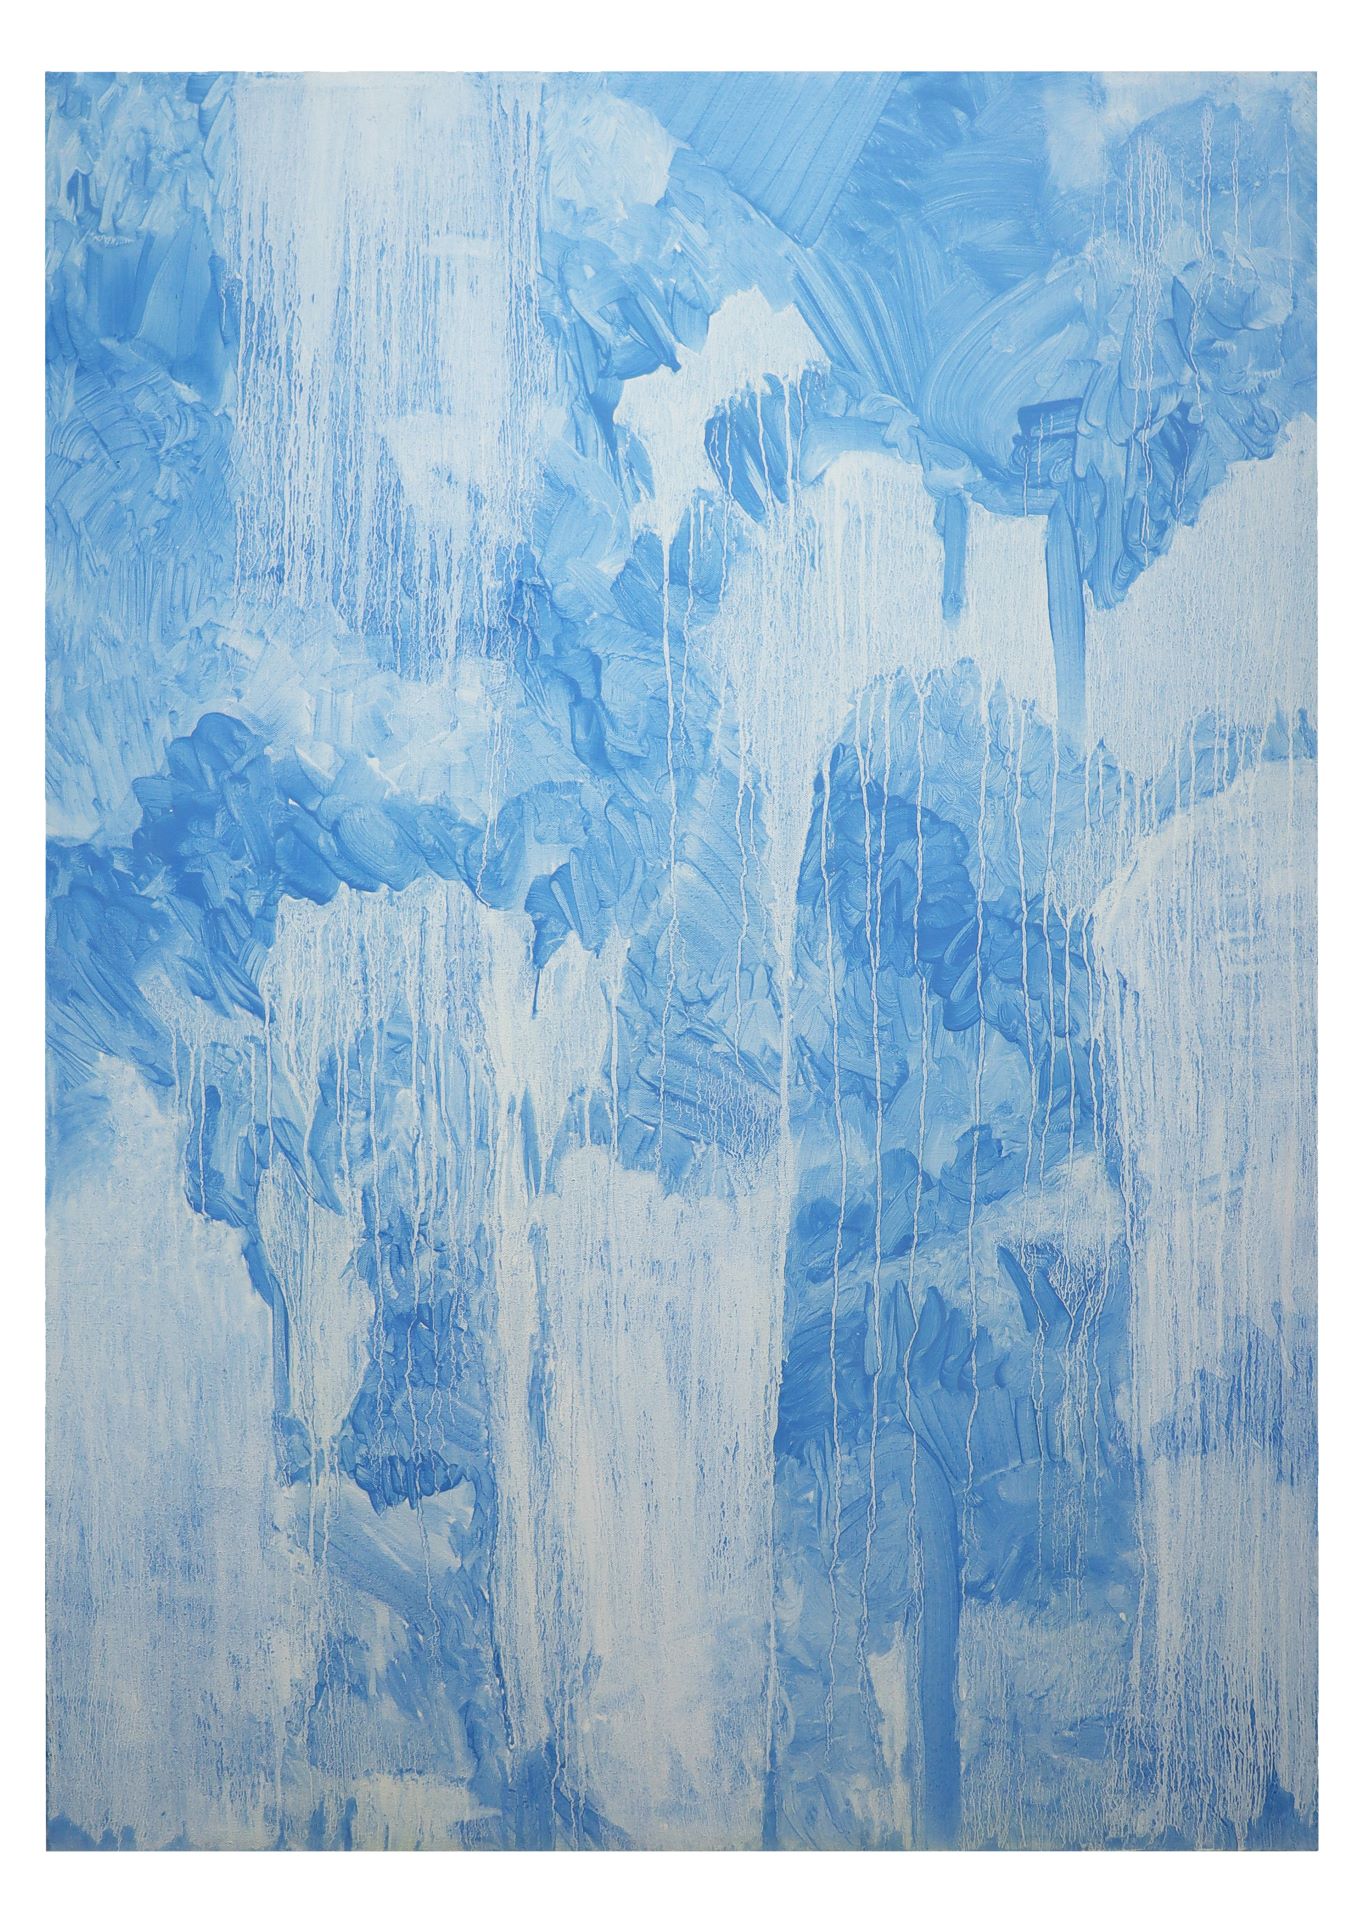 Untitled (Blue), 113cm x 79cm, Oil on Canvas, 2022